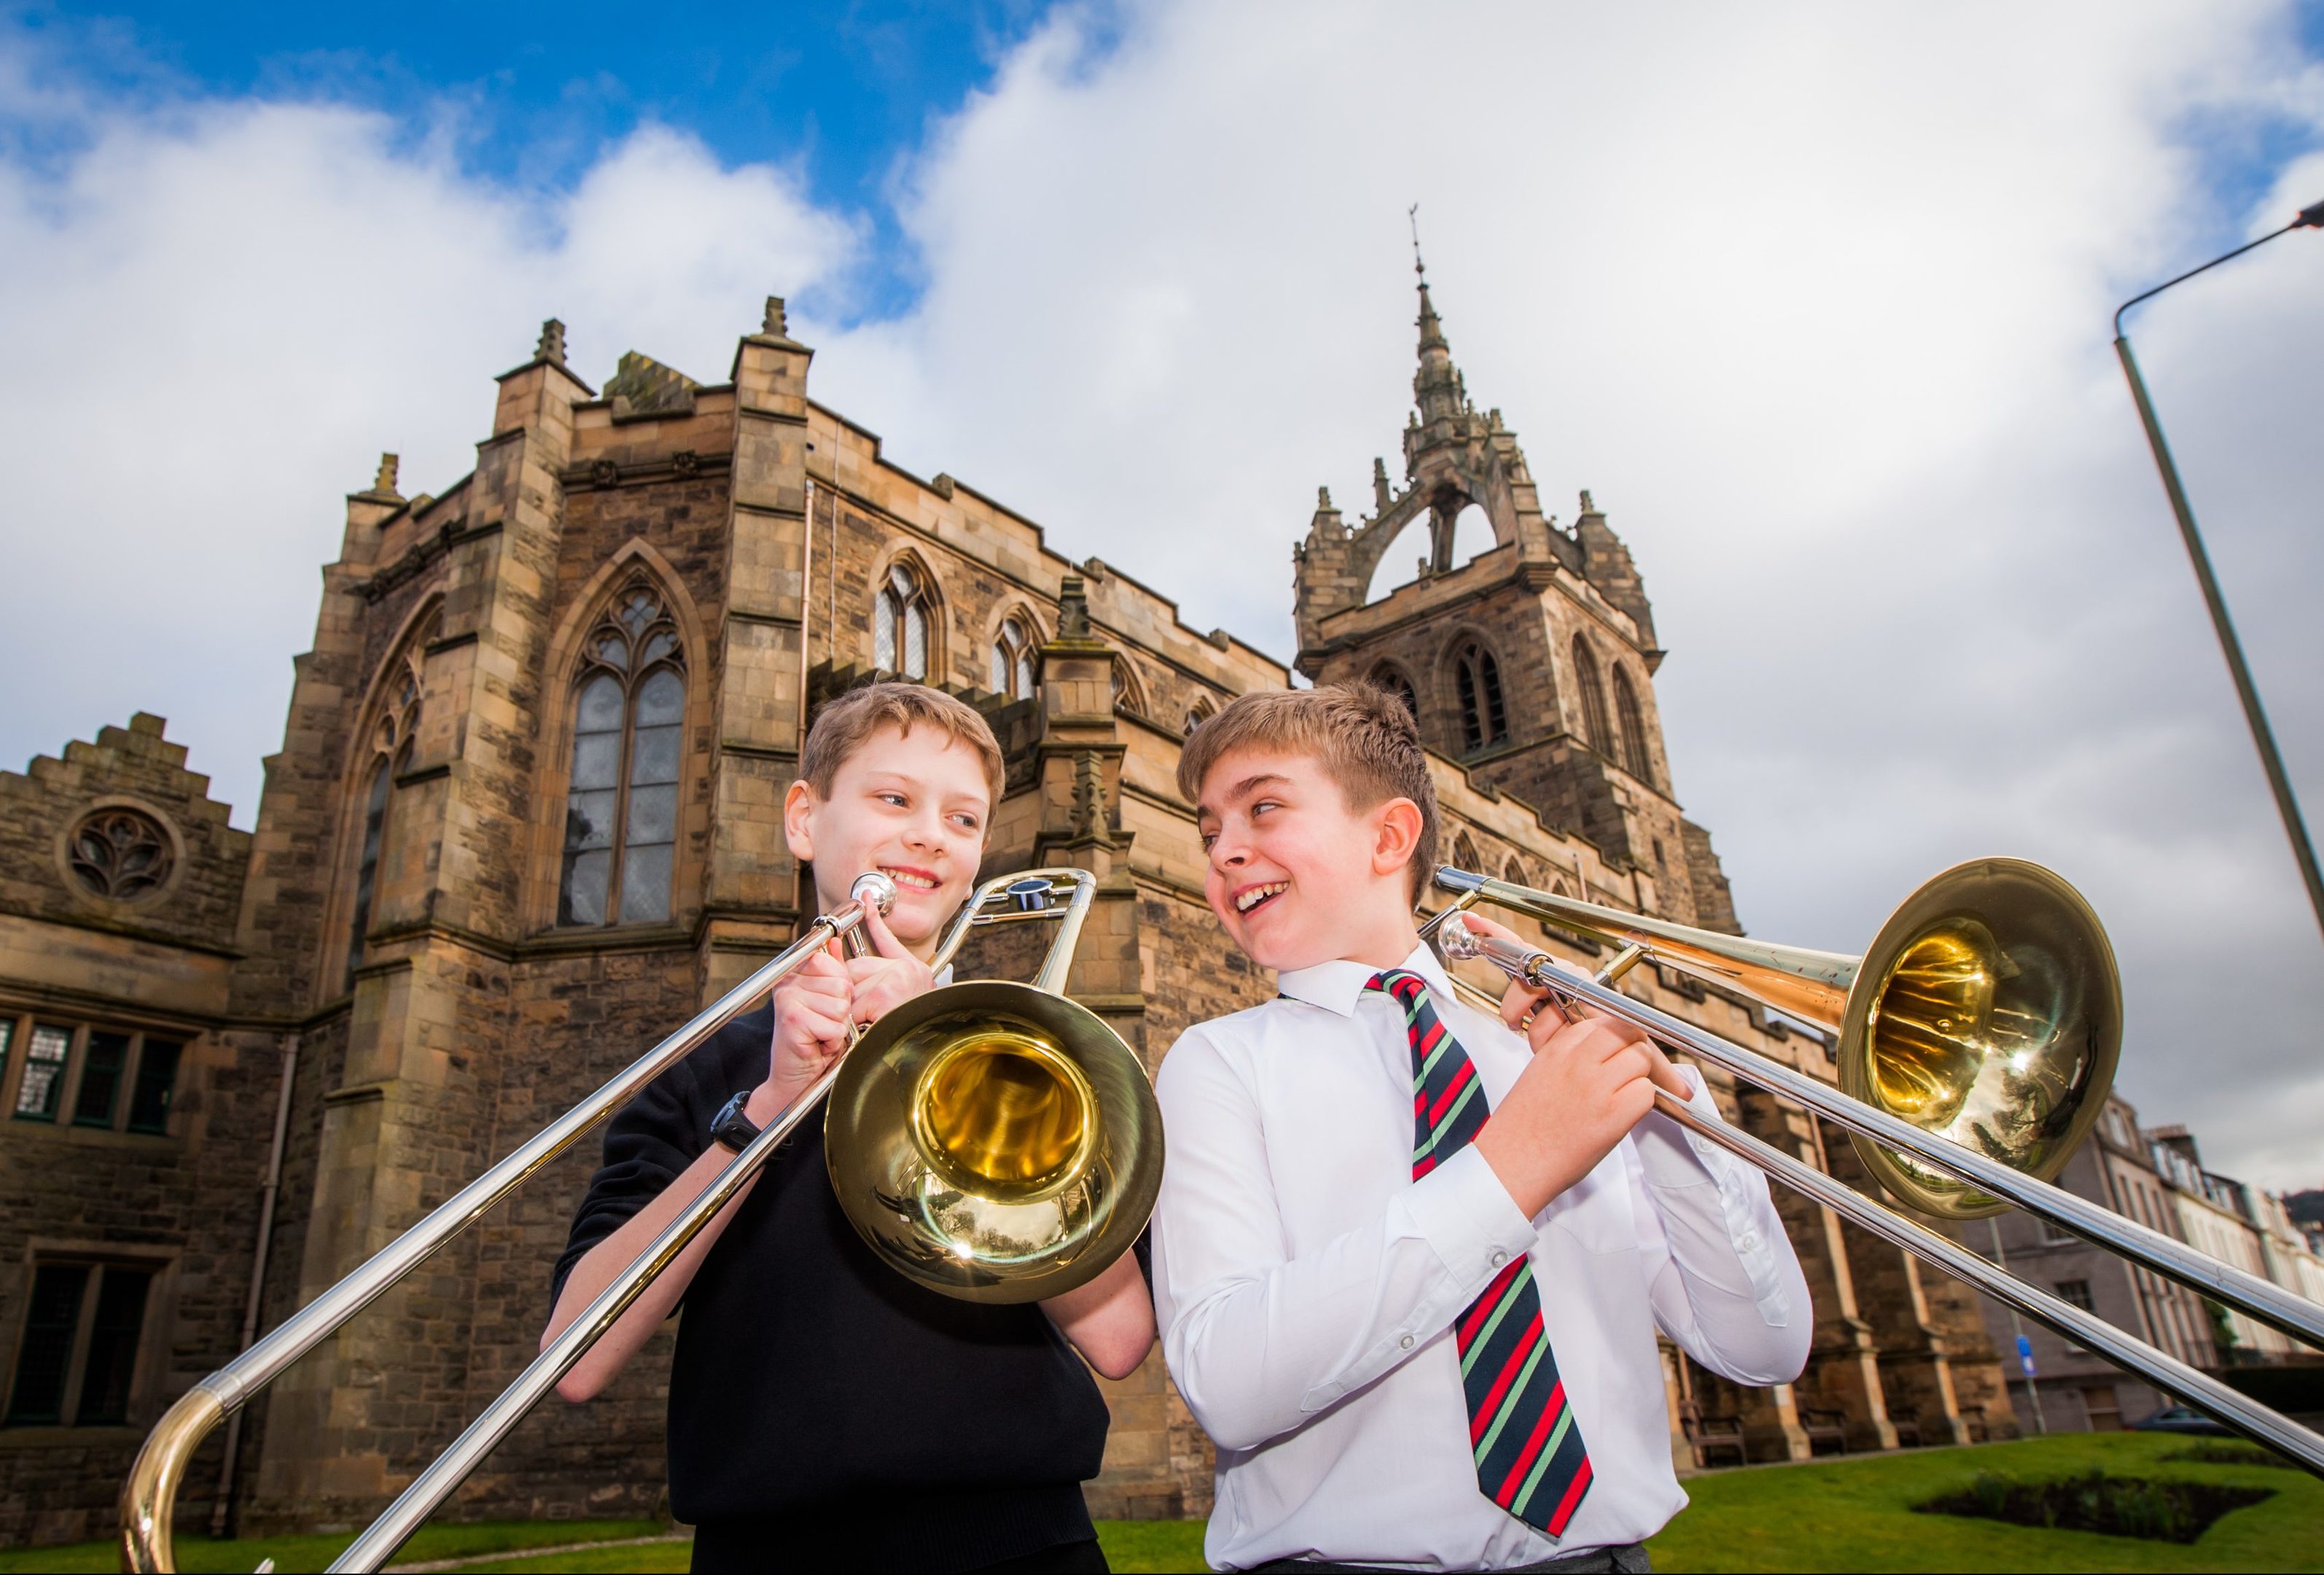 Elliot Soreide (Perth High School, left) and Leo Rodger (RDM Primary School, right) who took part in the trombone solo, elementary class.